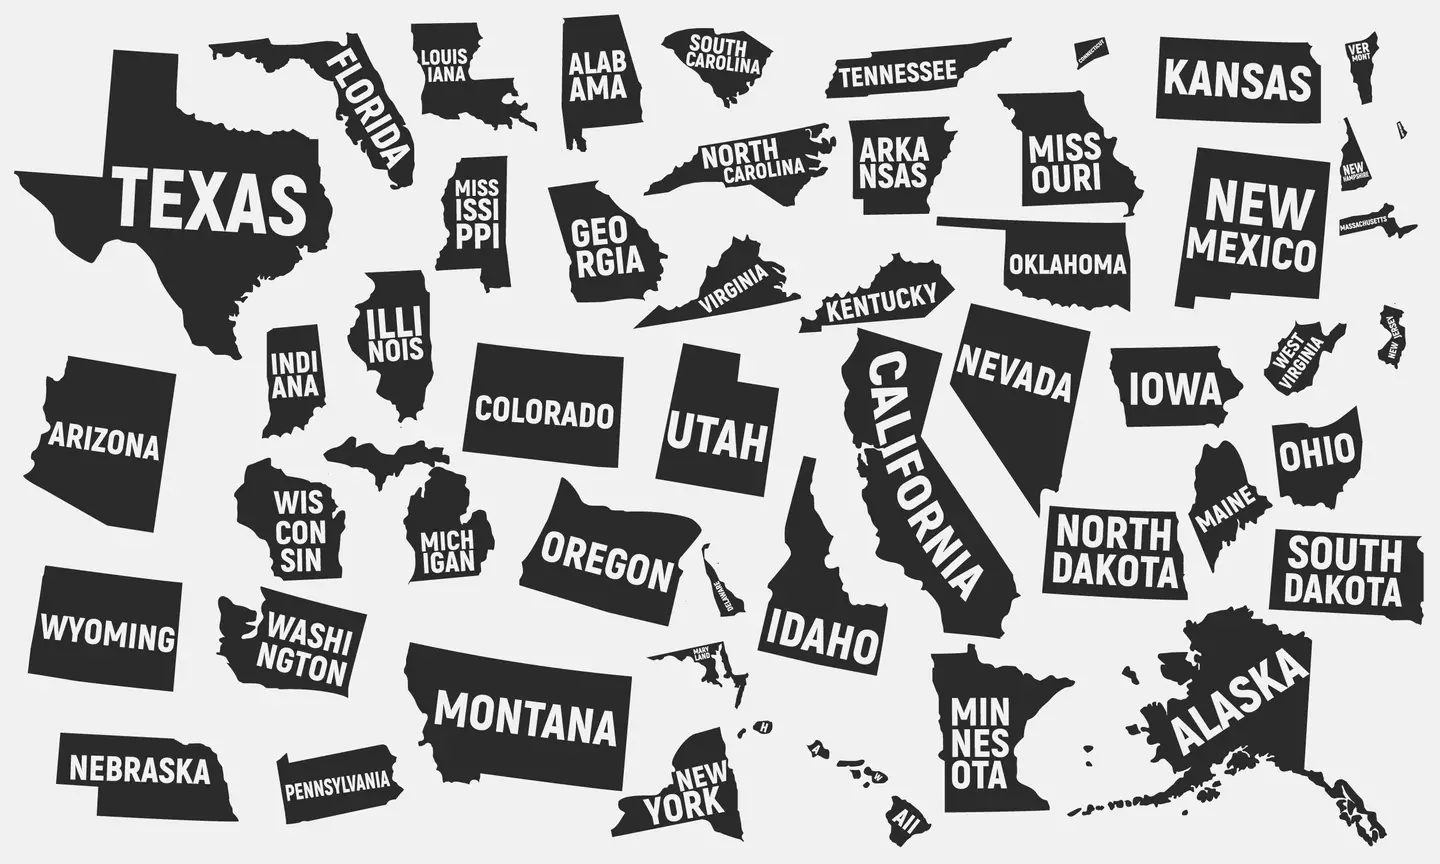 Four of the US states account for nearly a third of the population.